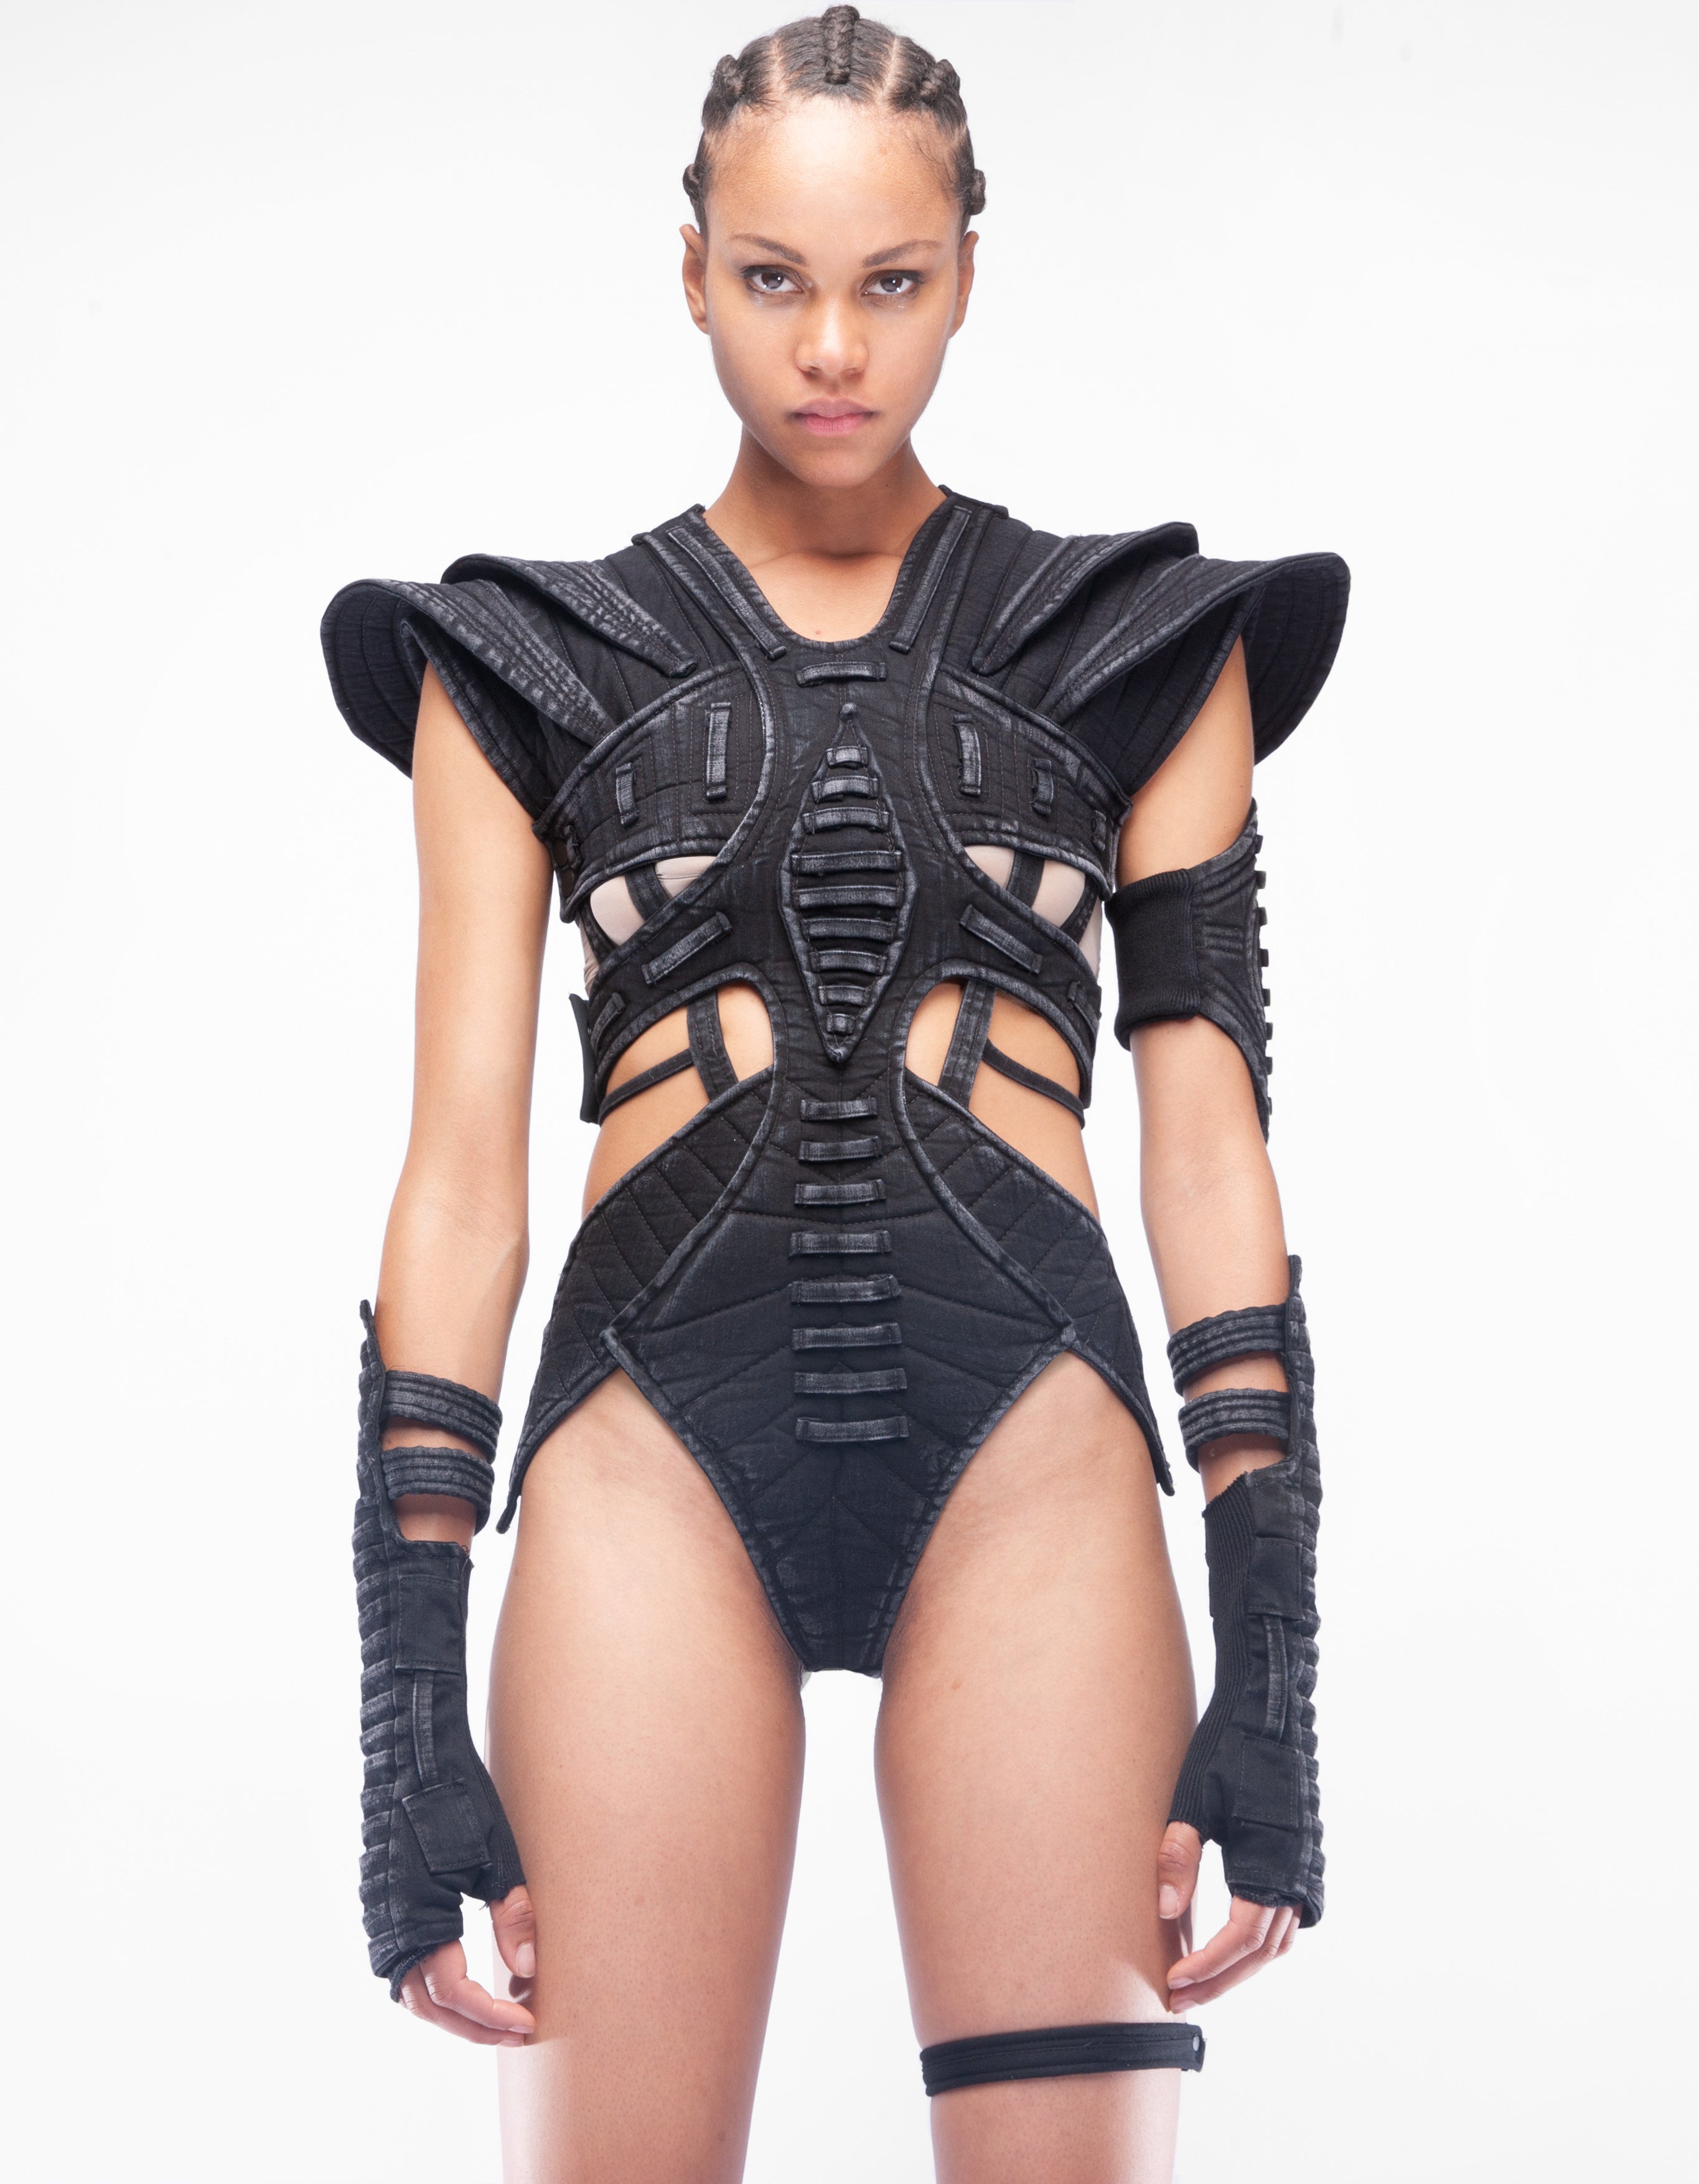 BODY SUIT STARSEED